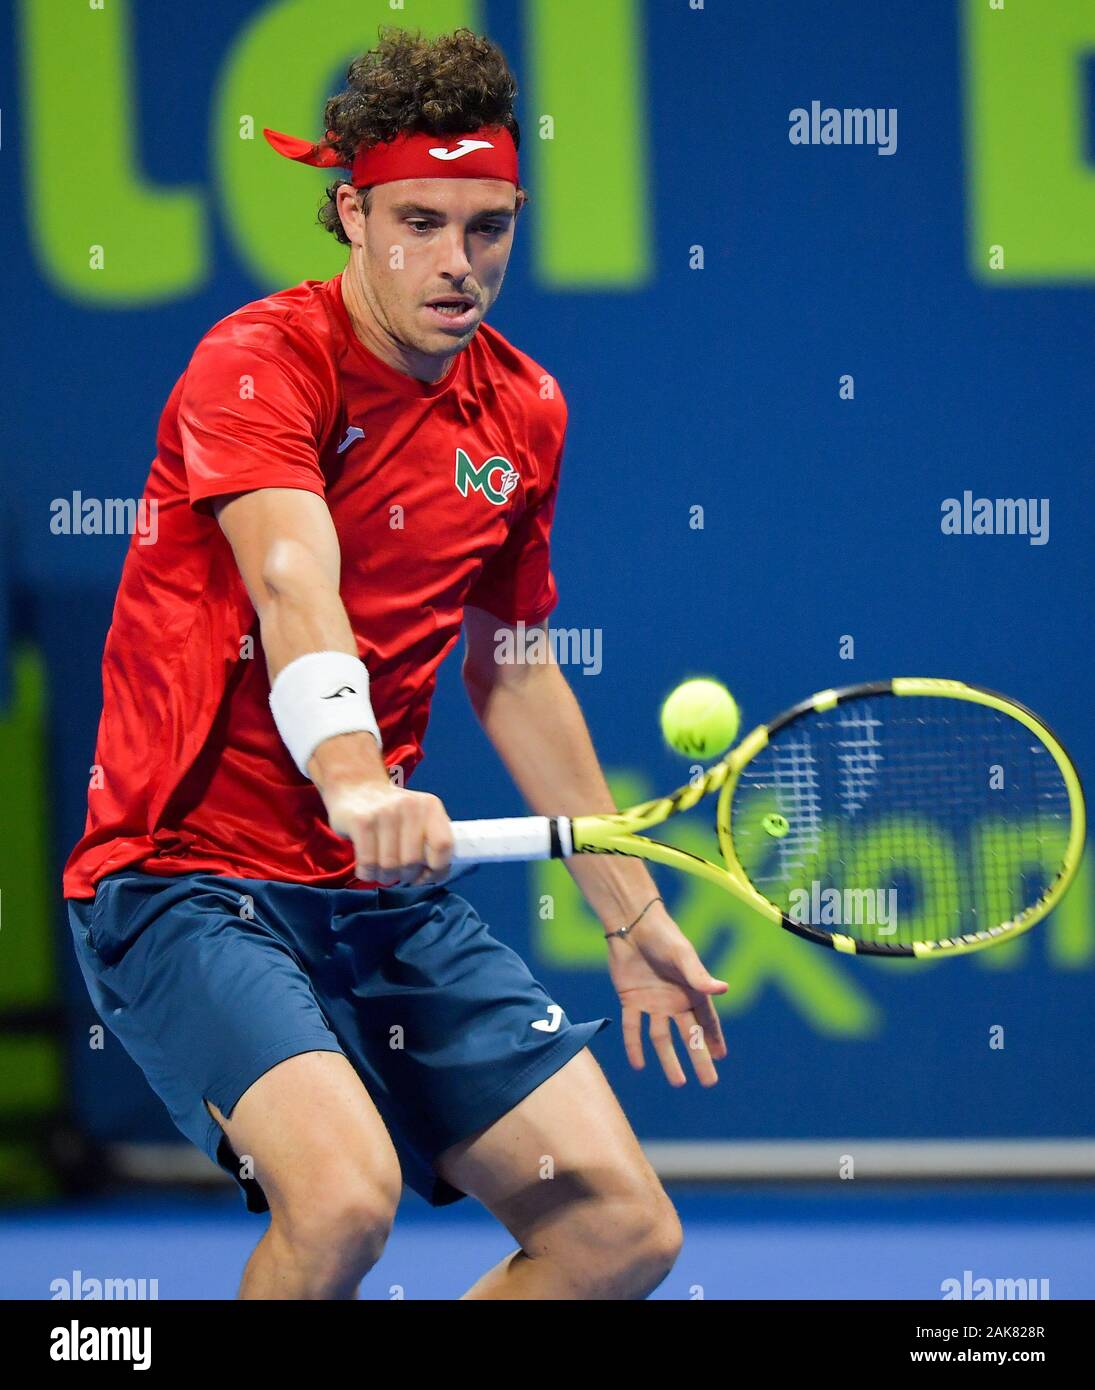 Doha, Qatar. 7th Jan, 2020. Marco Cecchinato of Italy returns the ball  during the first round match against Pierre-Hugues Herbert of France at the  ATP Qatar Open tennis tournament at the Khalifa